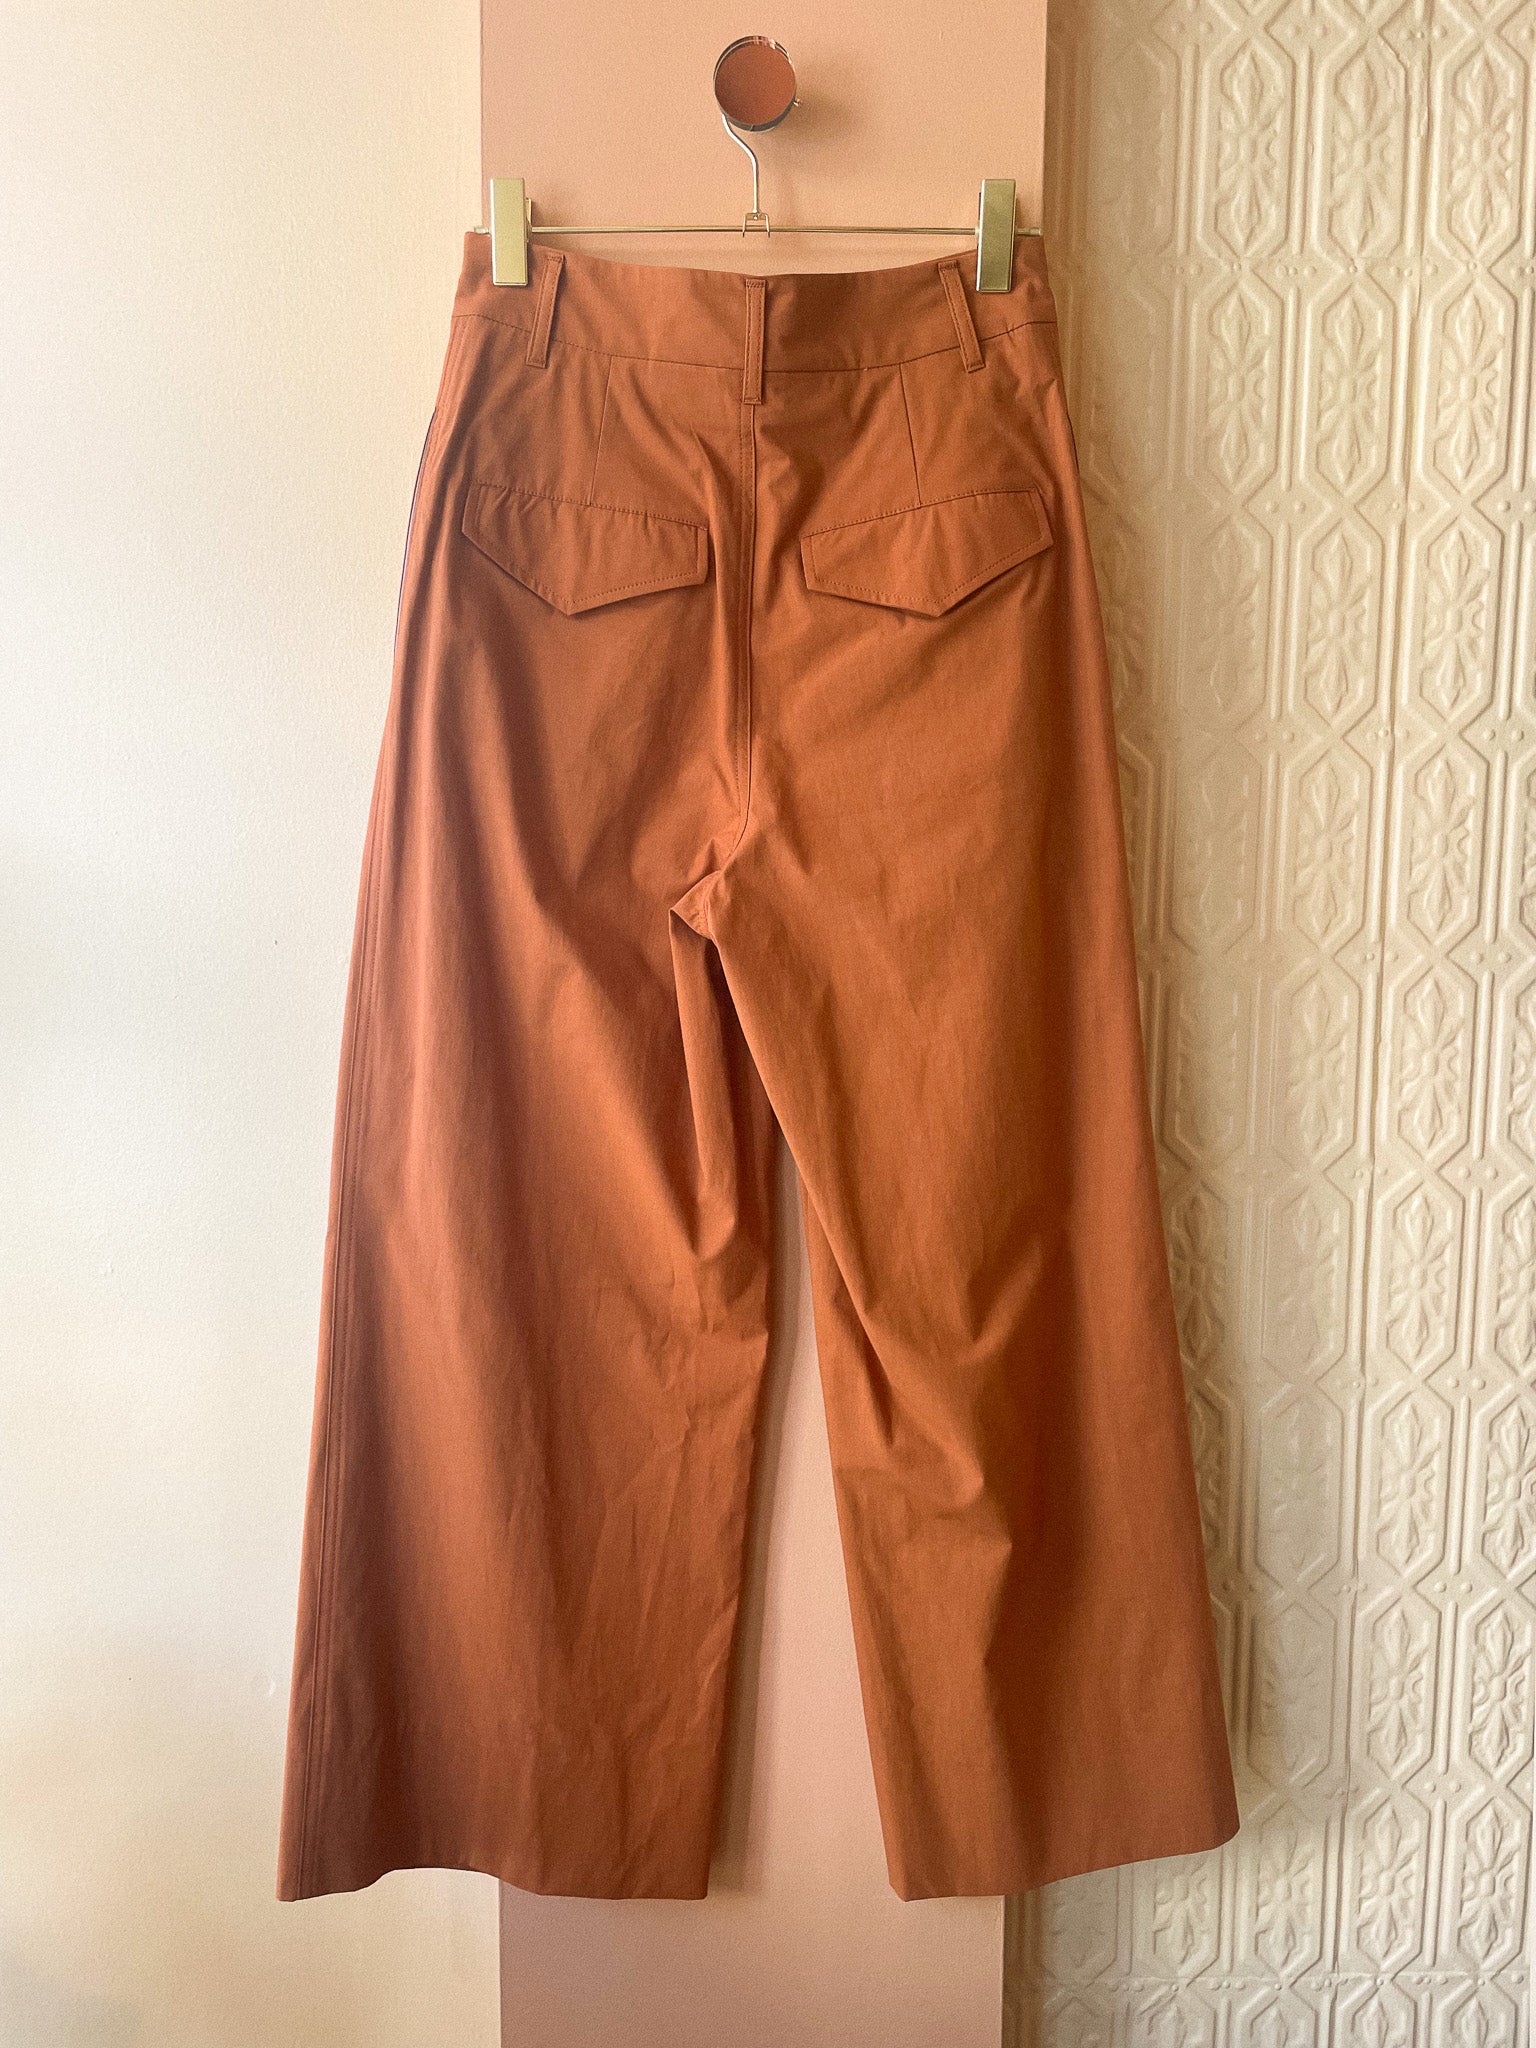 Relaxed Pleat Front Pant